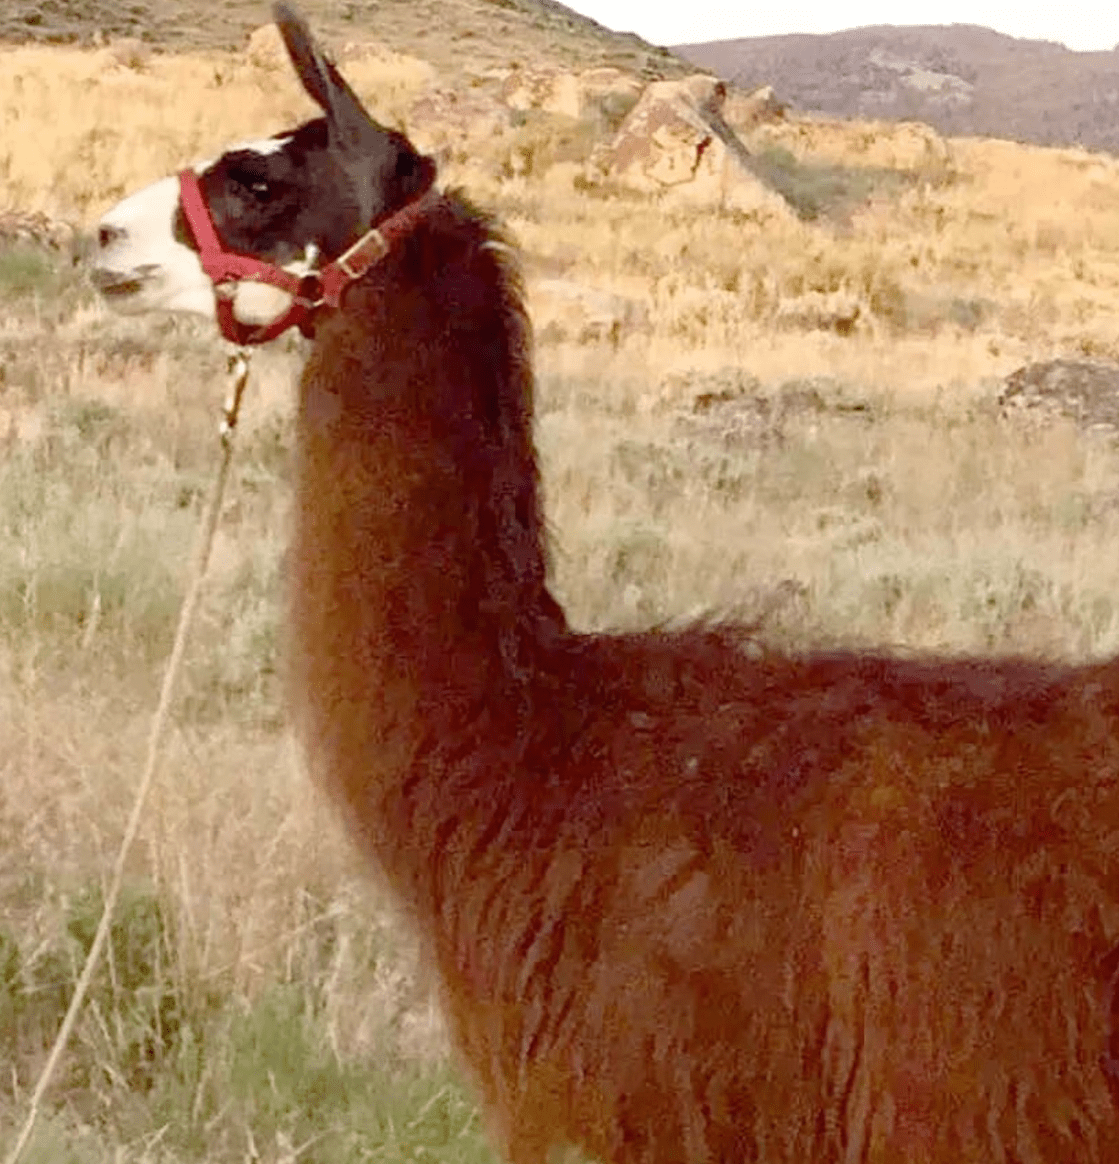 Joaquin The Llama found after surviving 17 days lost in Yellowstone